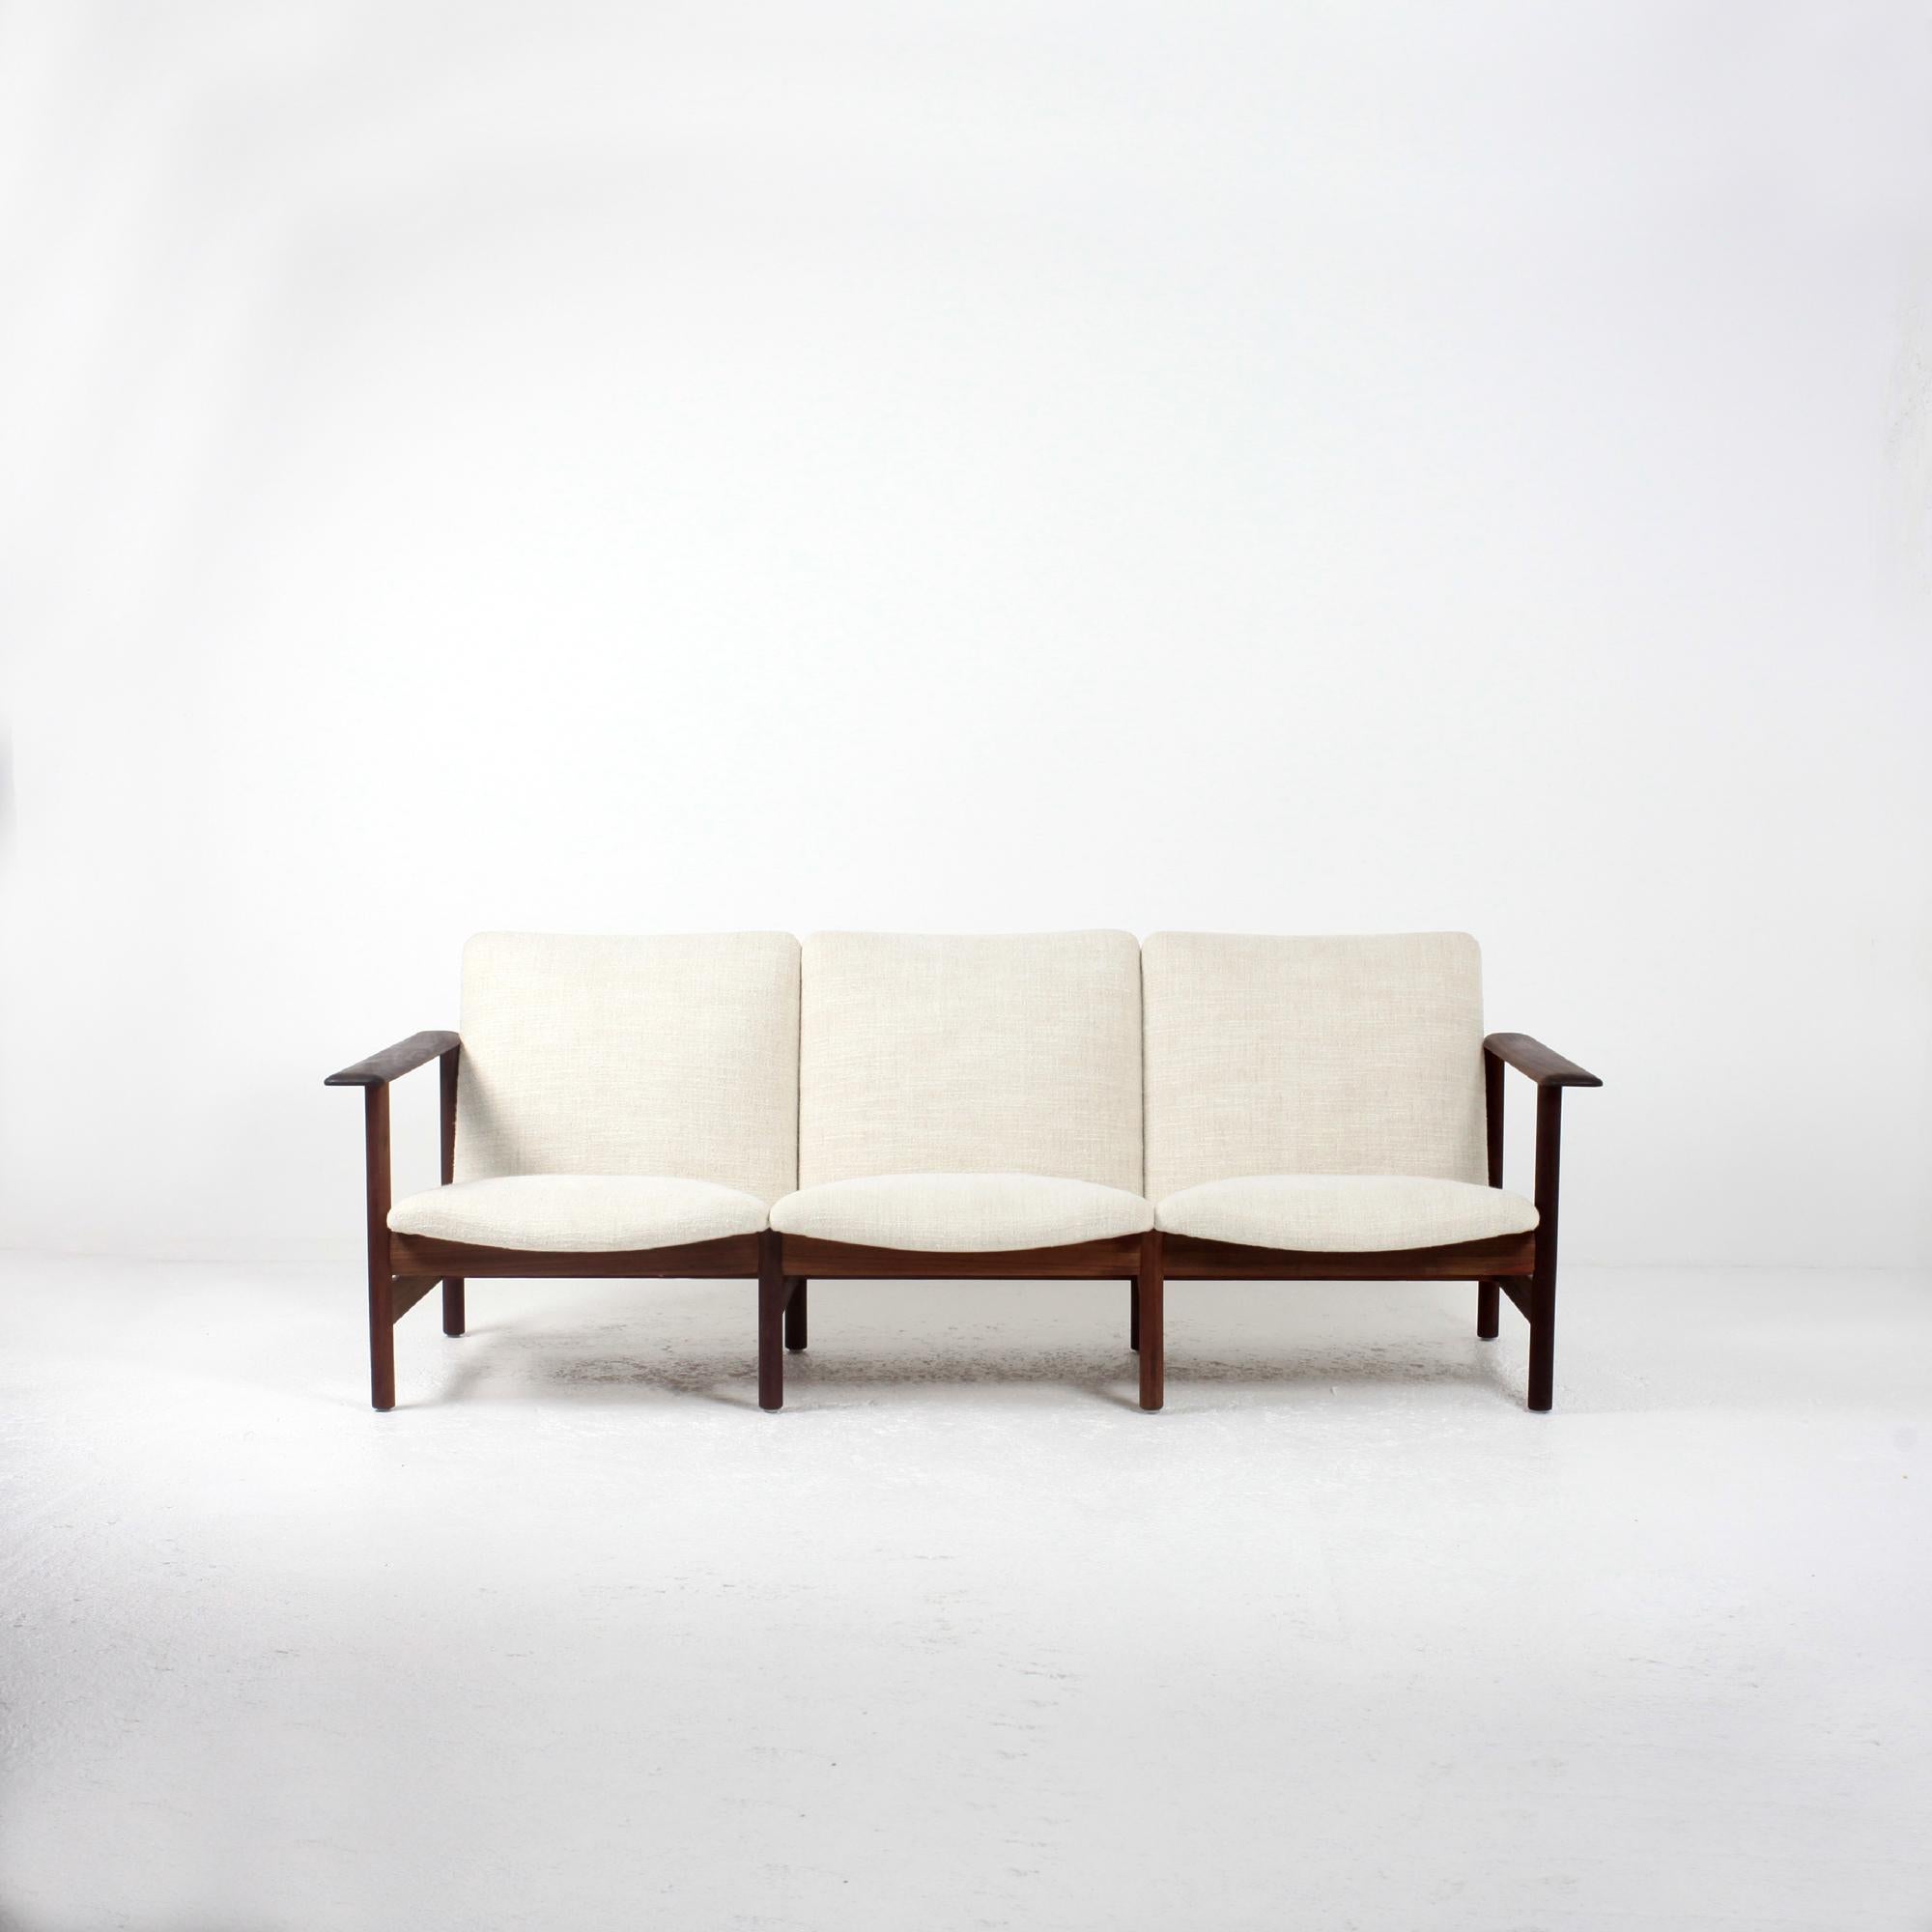 Steiner Sofa Solid Wood Frame and Pierre Frey Fabric, France, 1960s For Sale 5